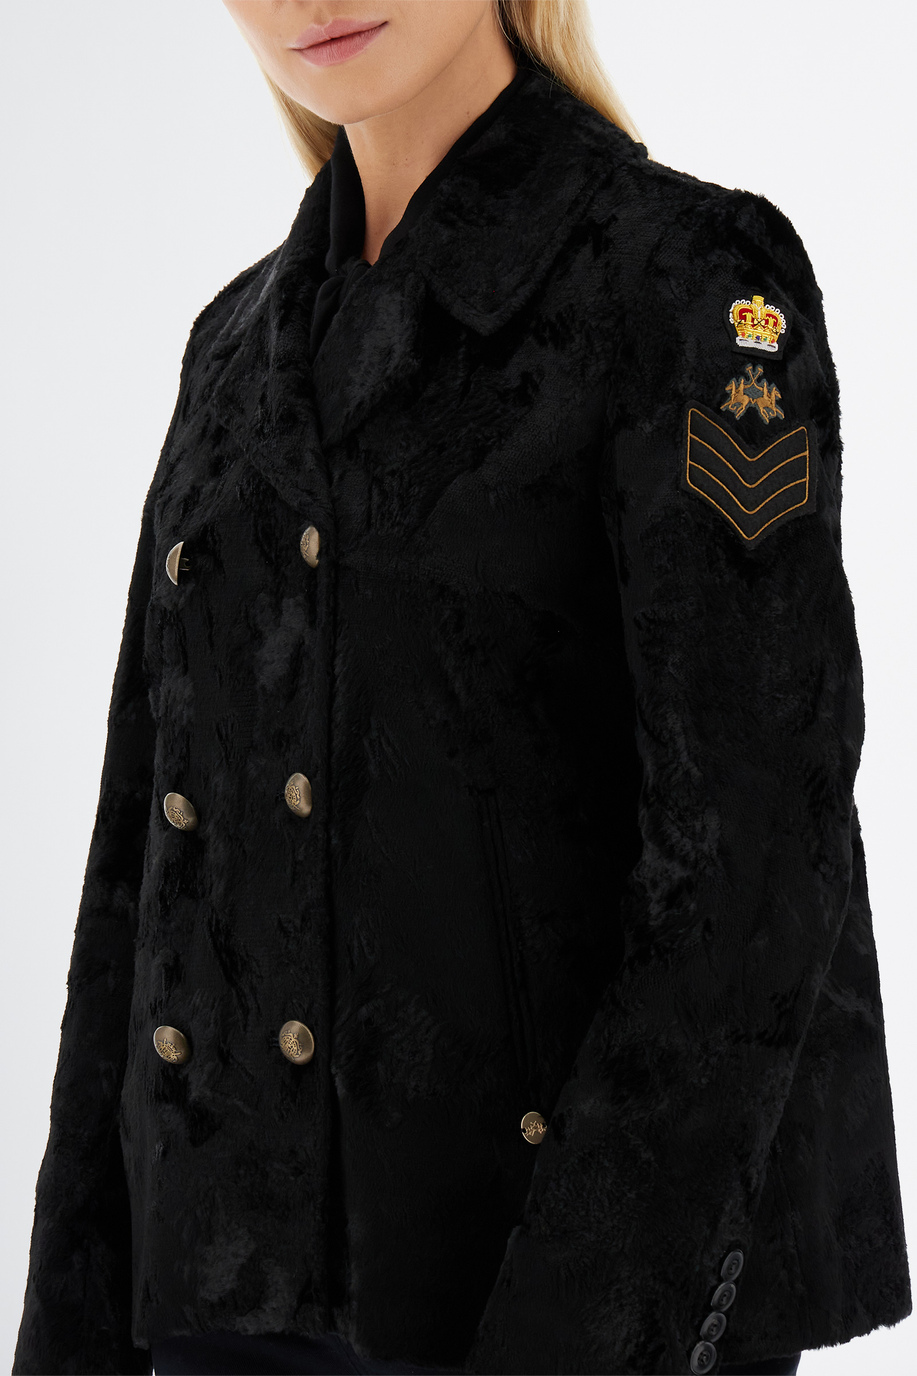 Women’s Long Sleeve England Jacket with Fur - Winter looks for her | La Martina - Official Online Shop